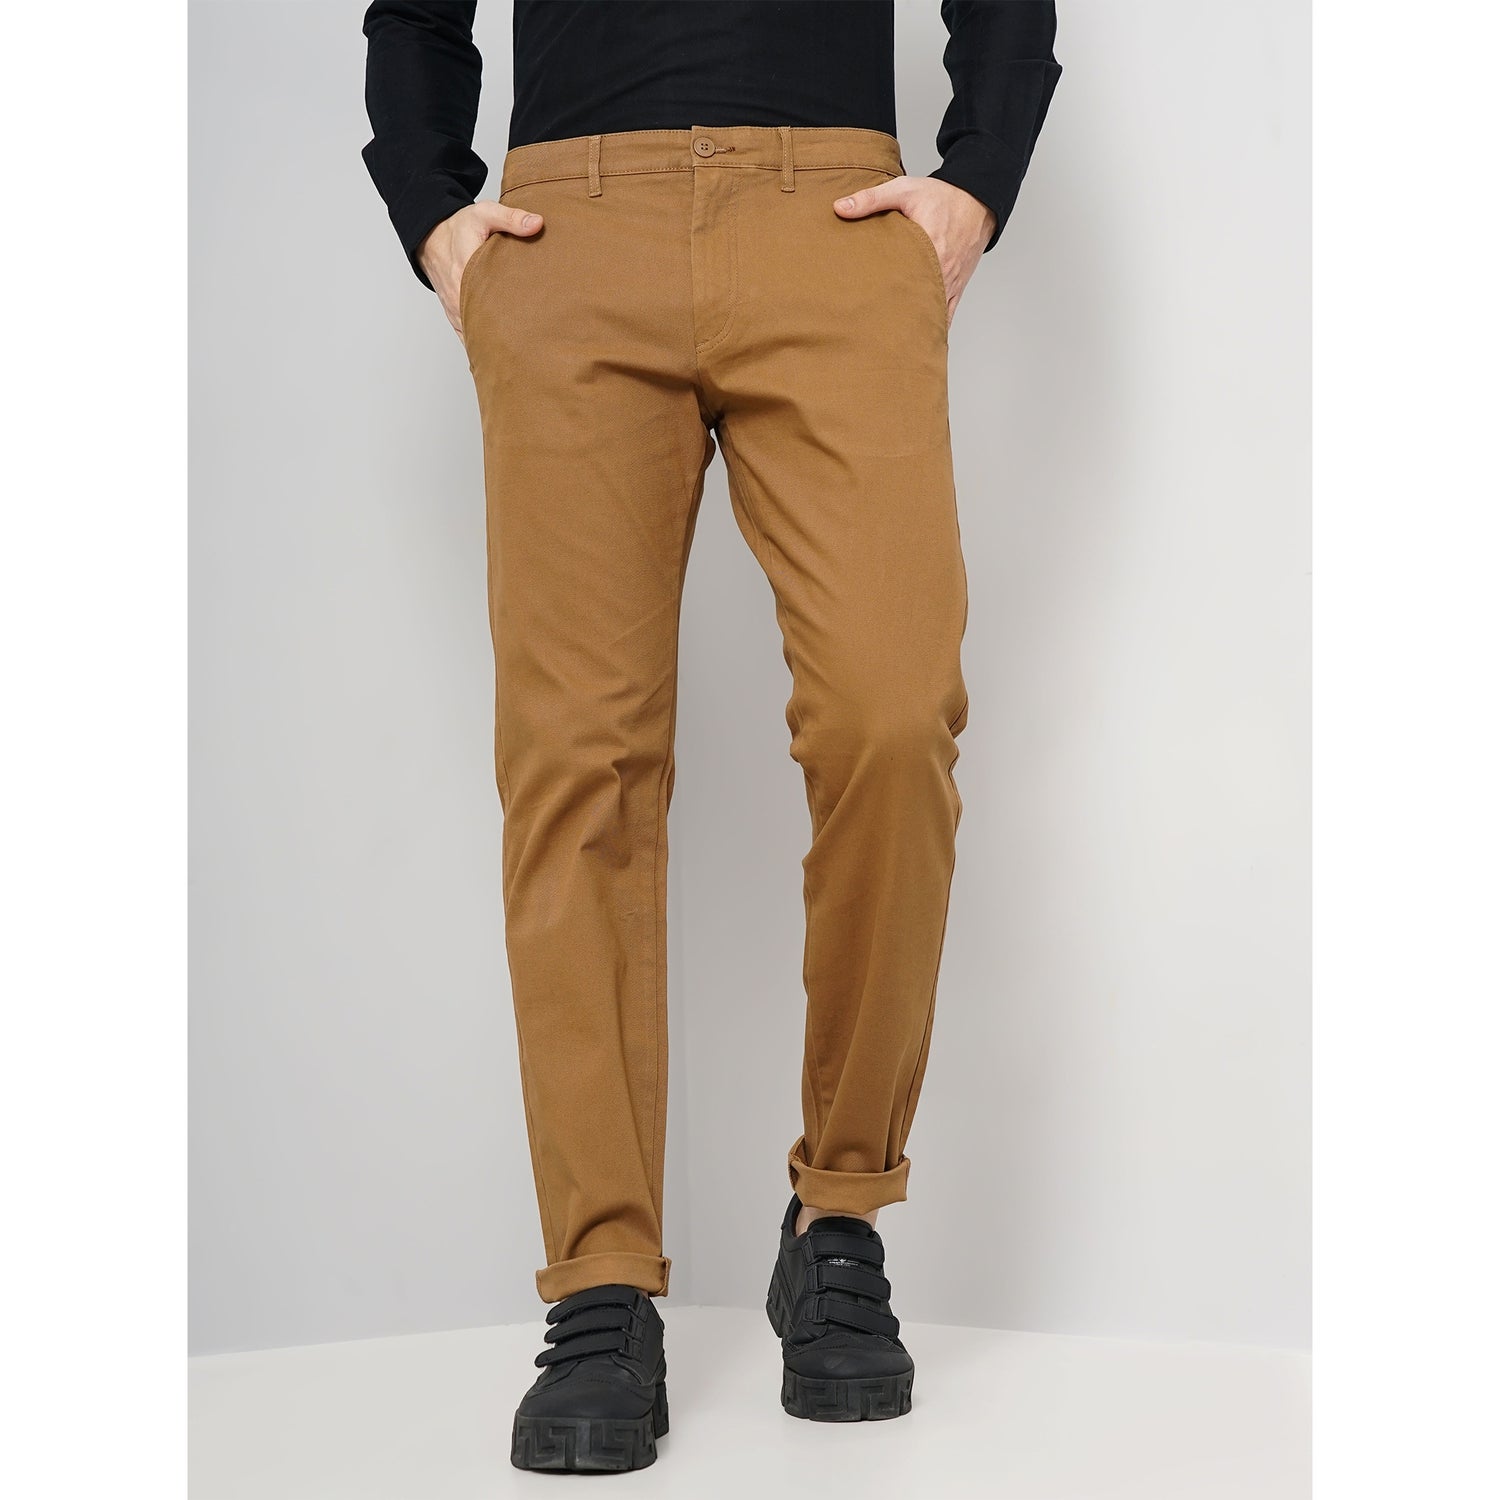 Brown Mid Rise Plain Cotton Slim Fit Chinos Trousers (TOCHARLES)